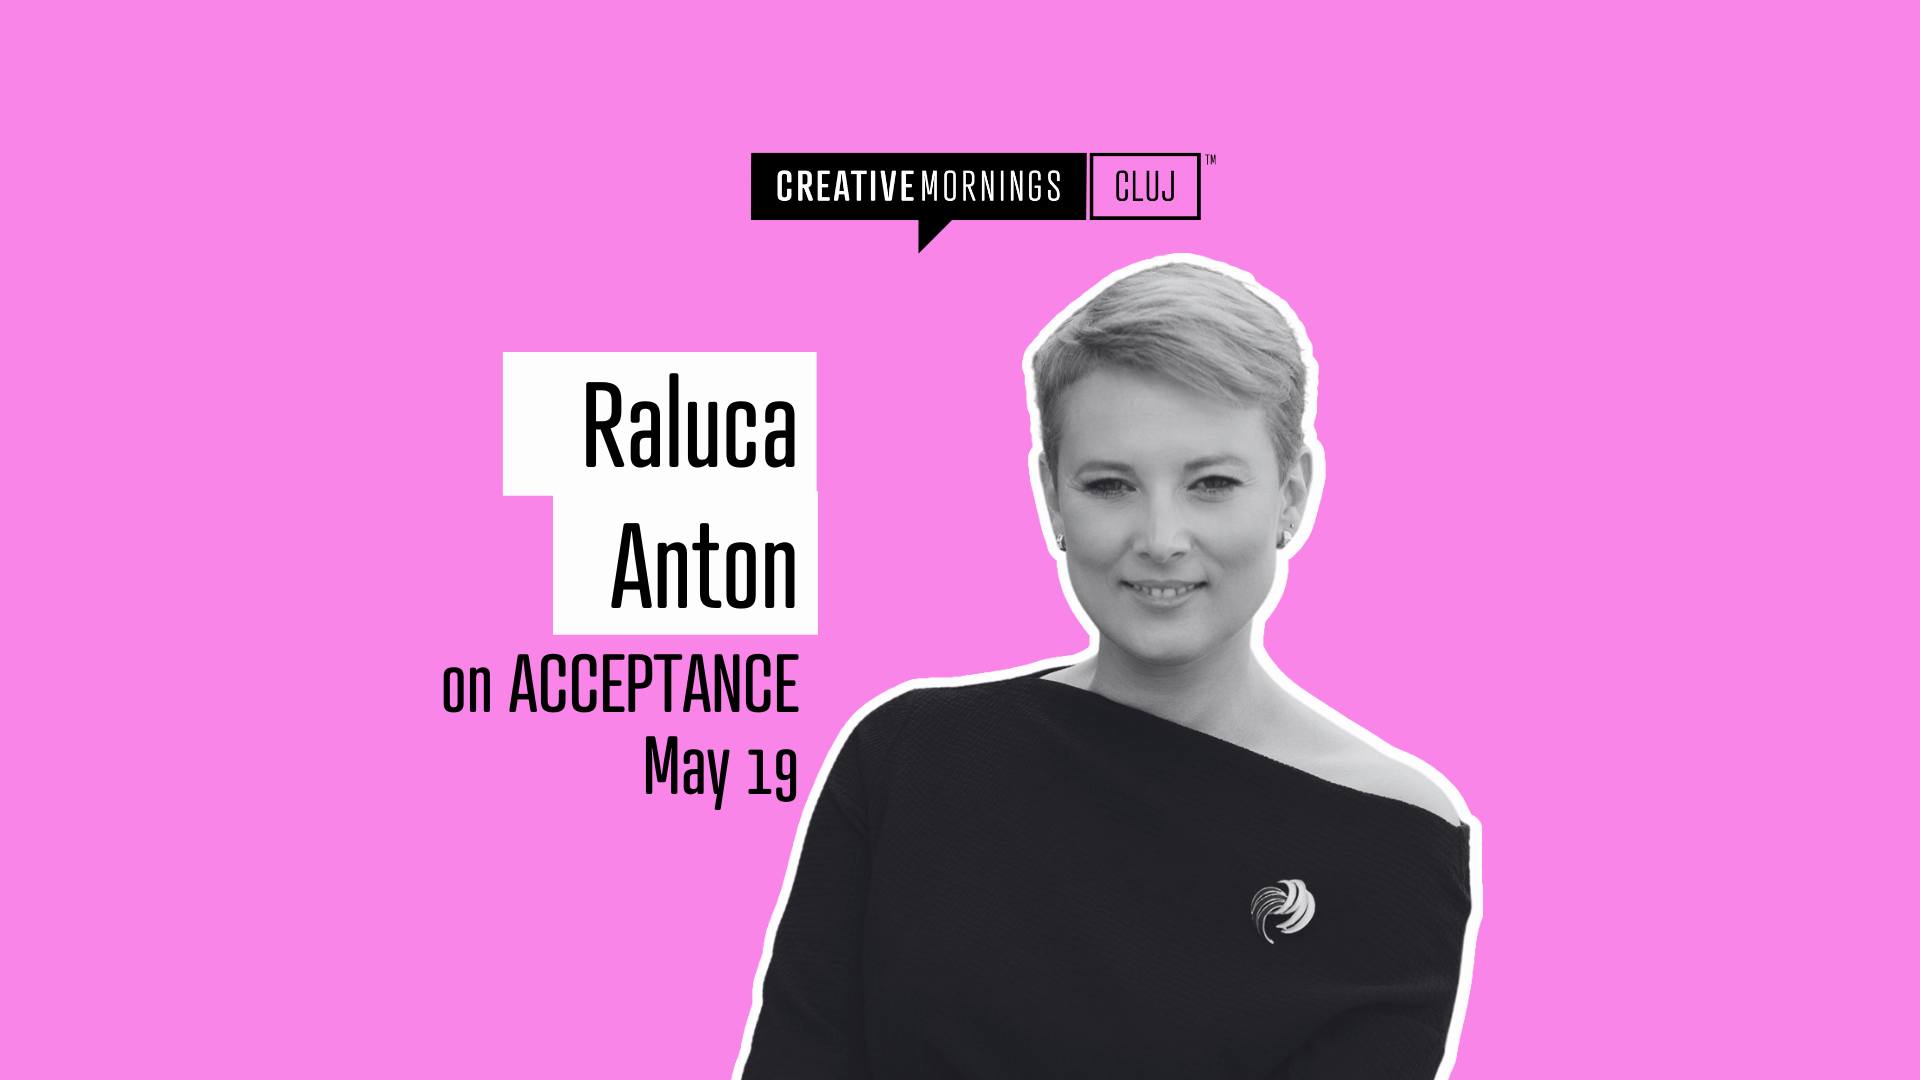 CreativeMornings Cluj on Acceptance with Raluca Anton